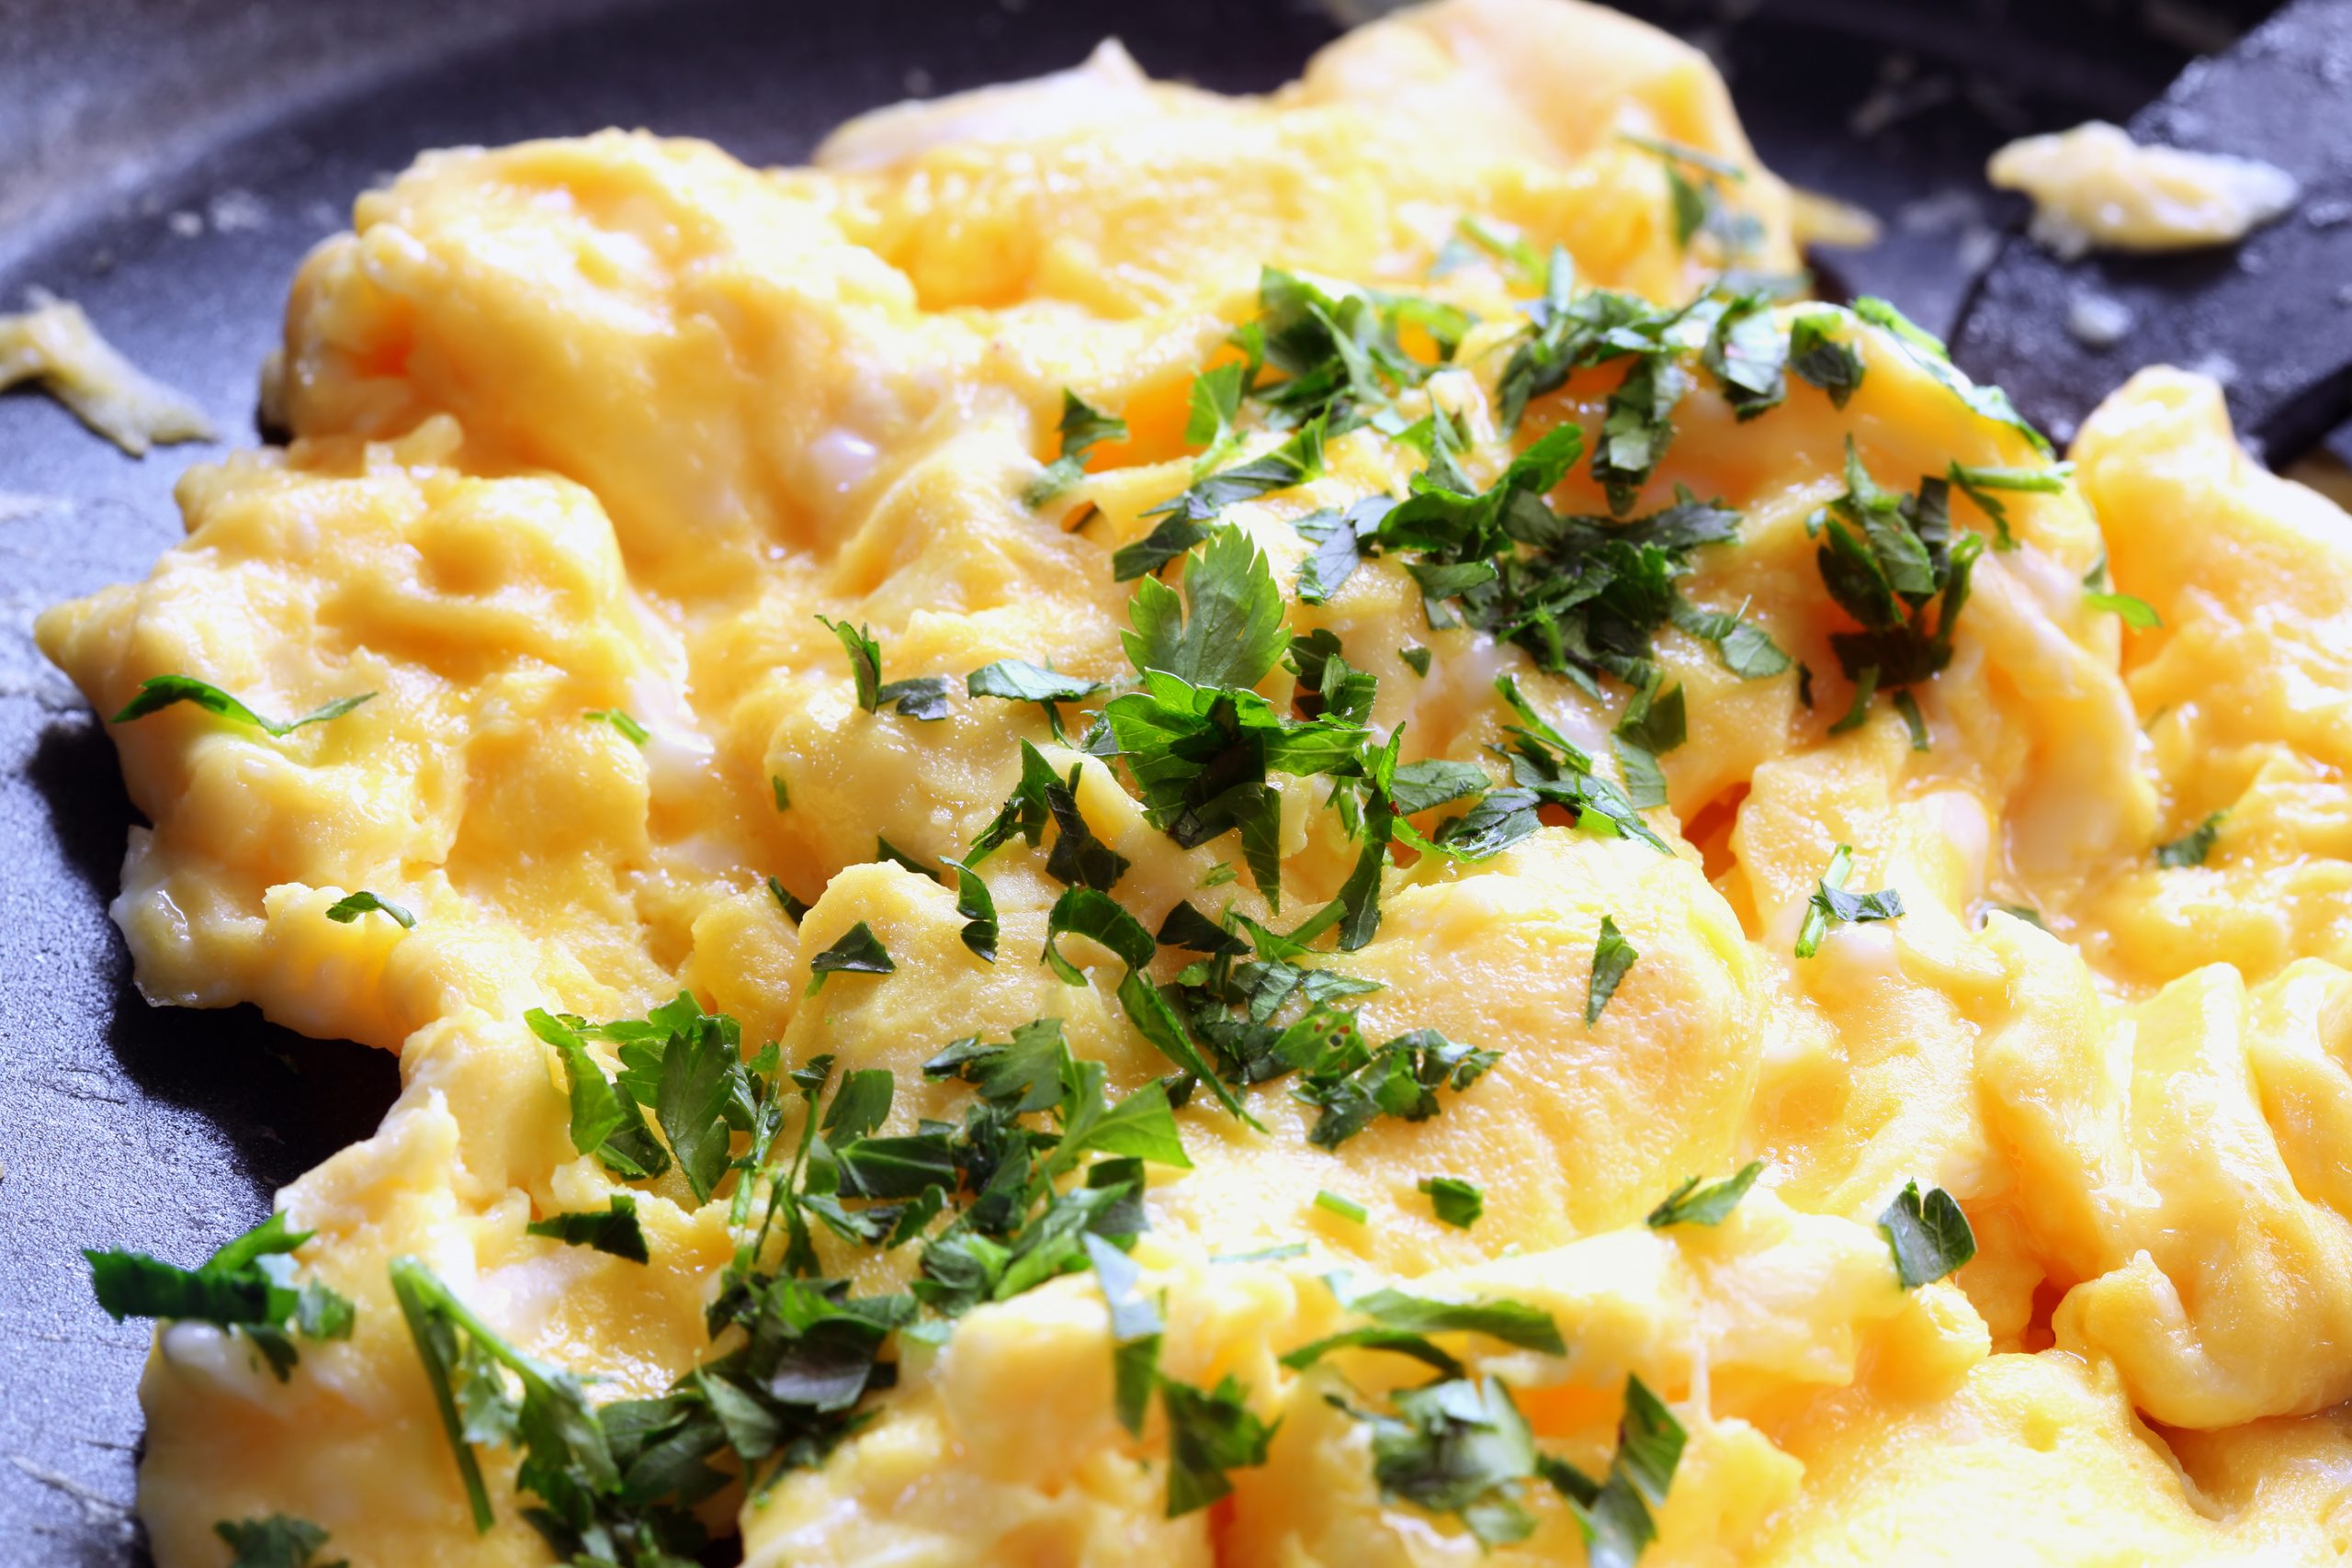 Start your day right with this soft-scrambled eggs recipe